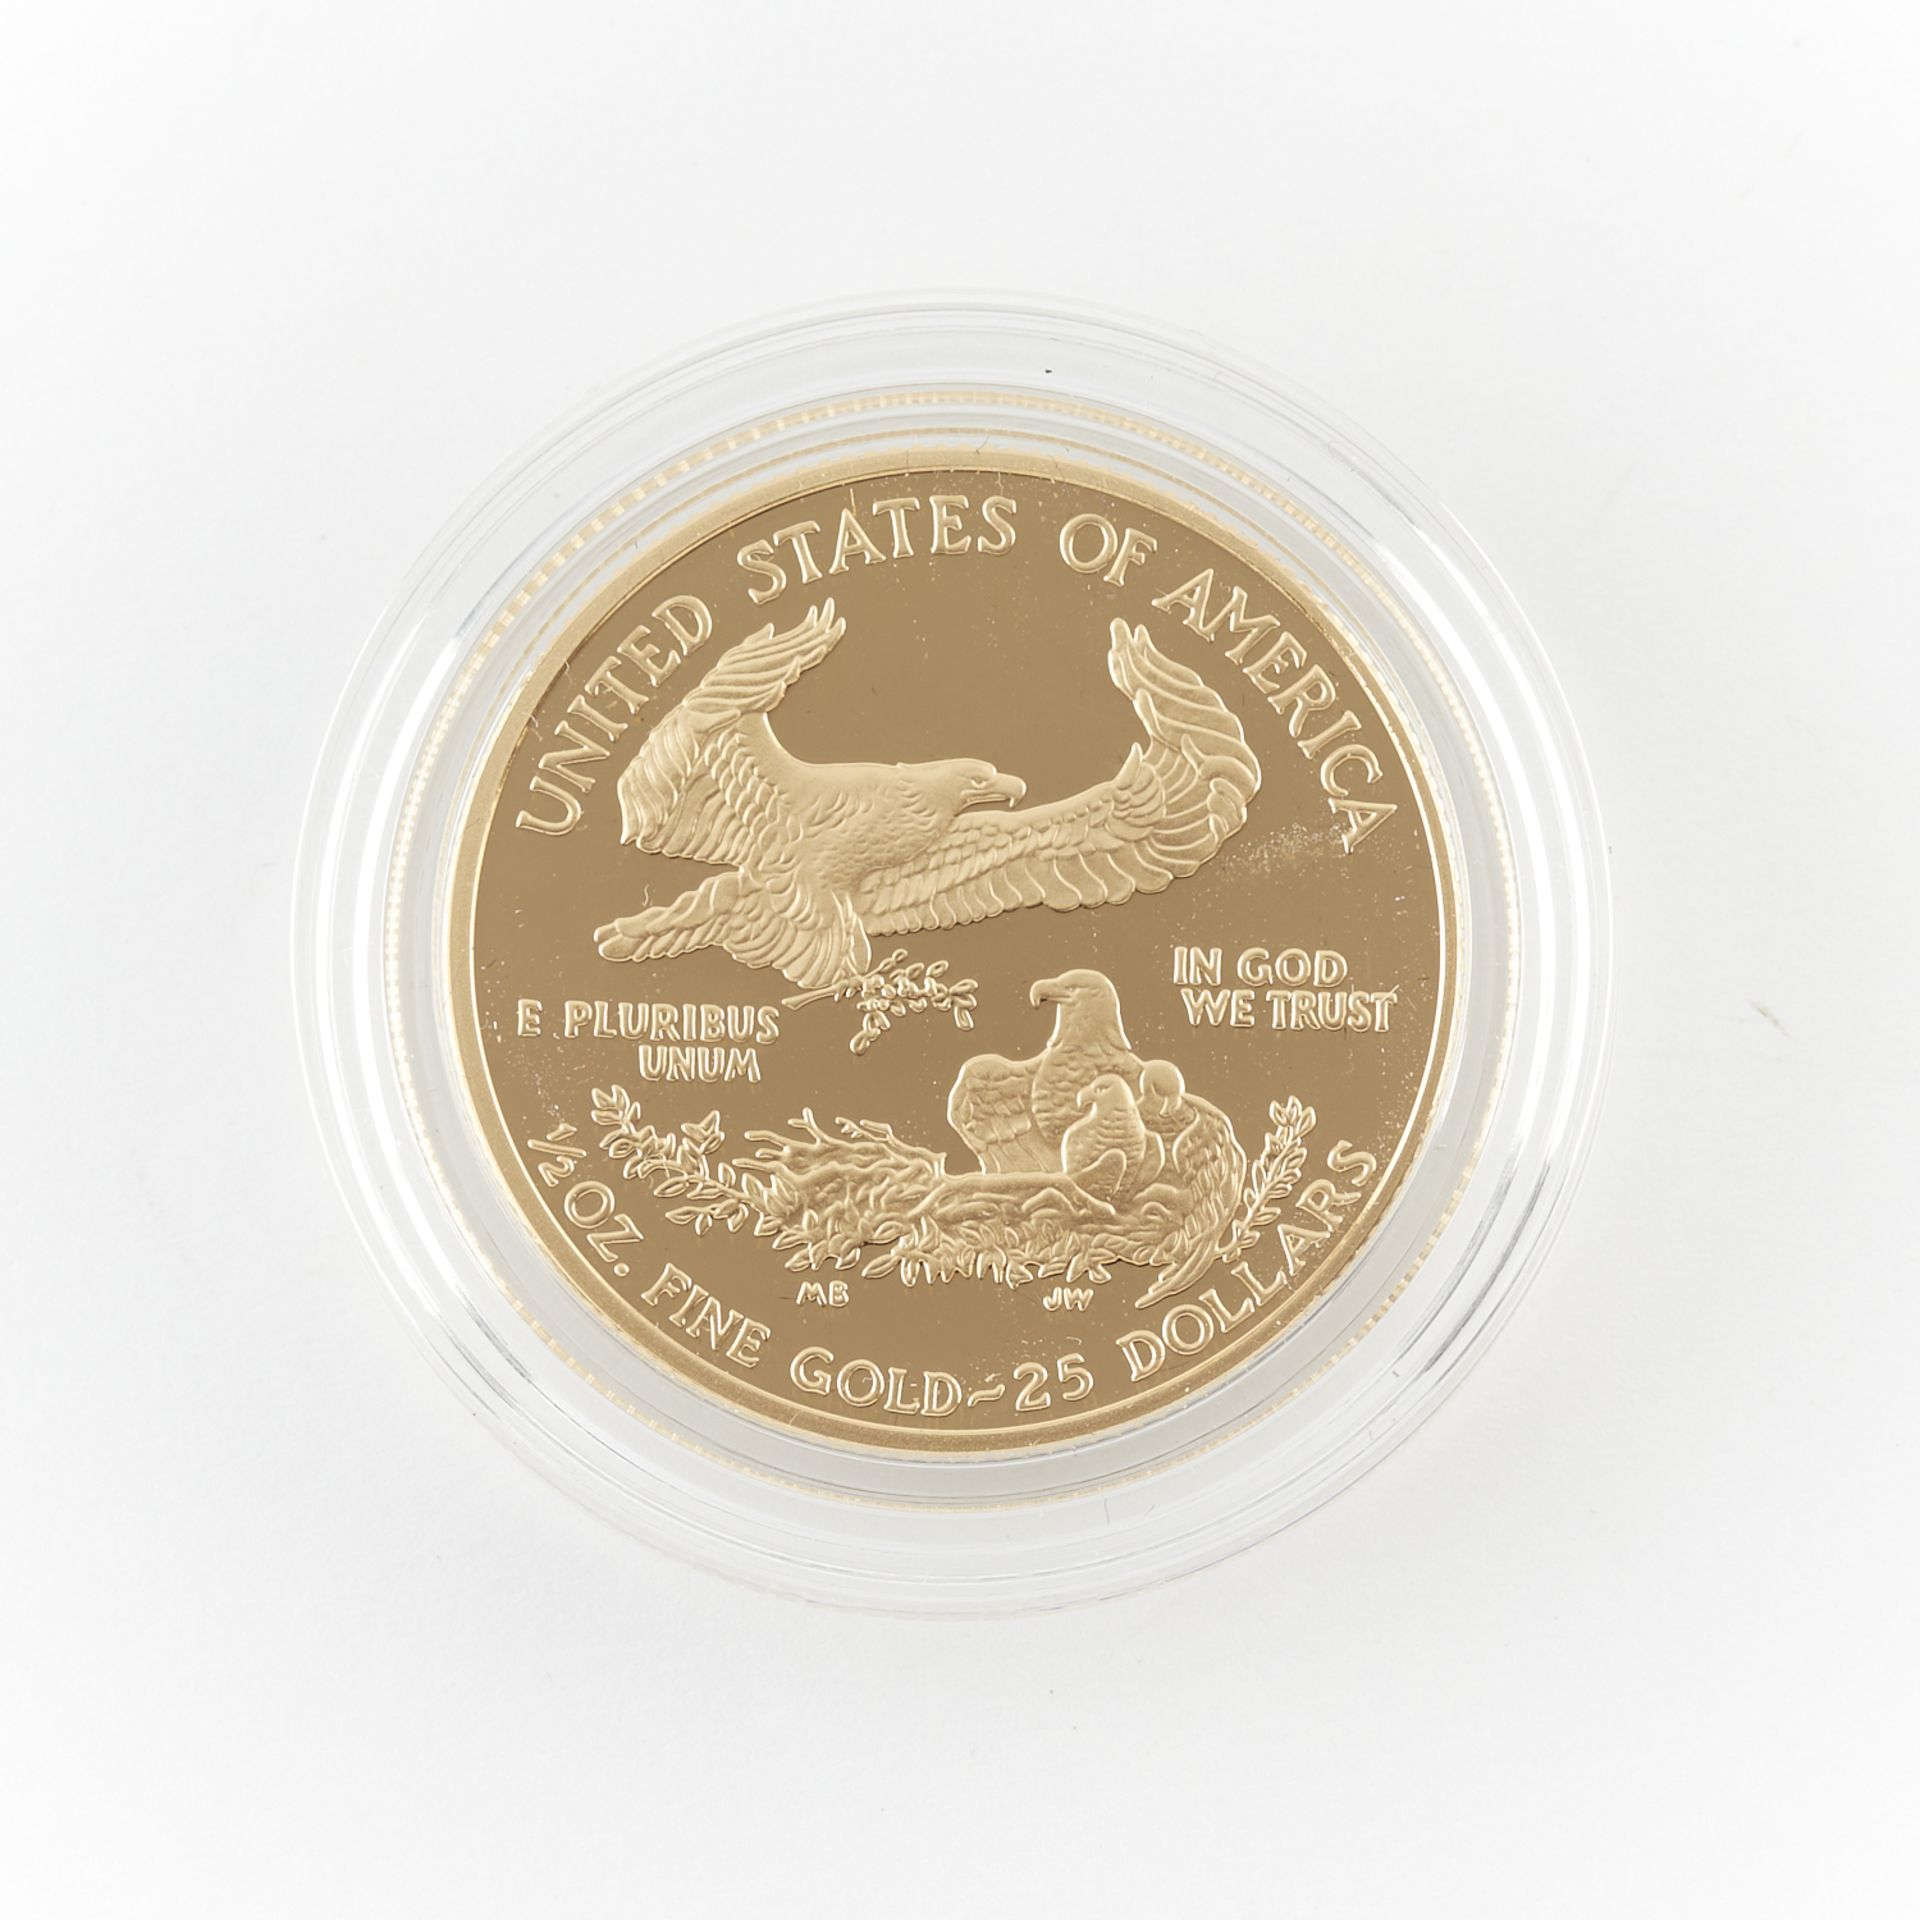 2006 $25 Gold American Eagle Proof Coin - Image 2 of 3